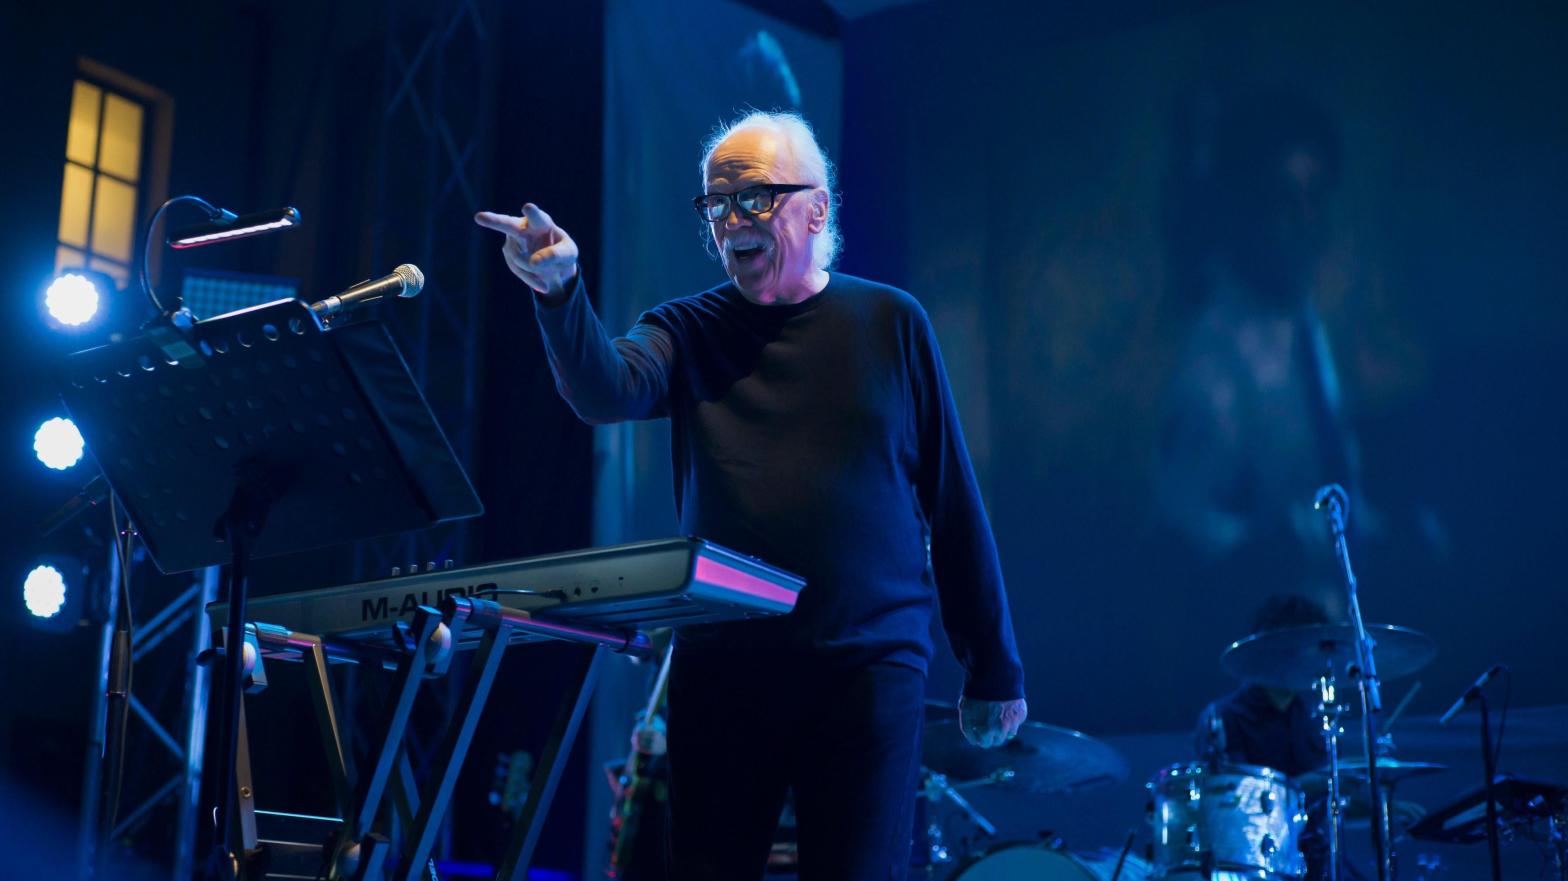 John Carpenter performs on August 26, 2016 in Turin, Italy.  (Photo: Awakening/Getty Images for City of Turin, Getty Images)